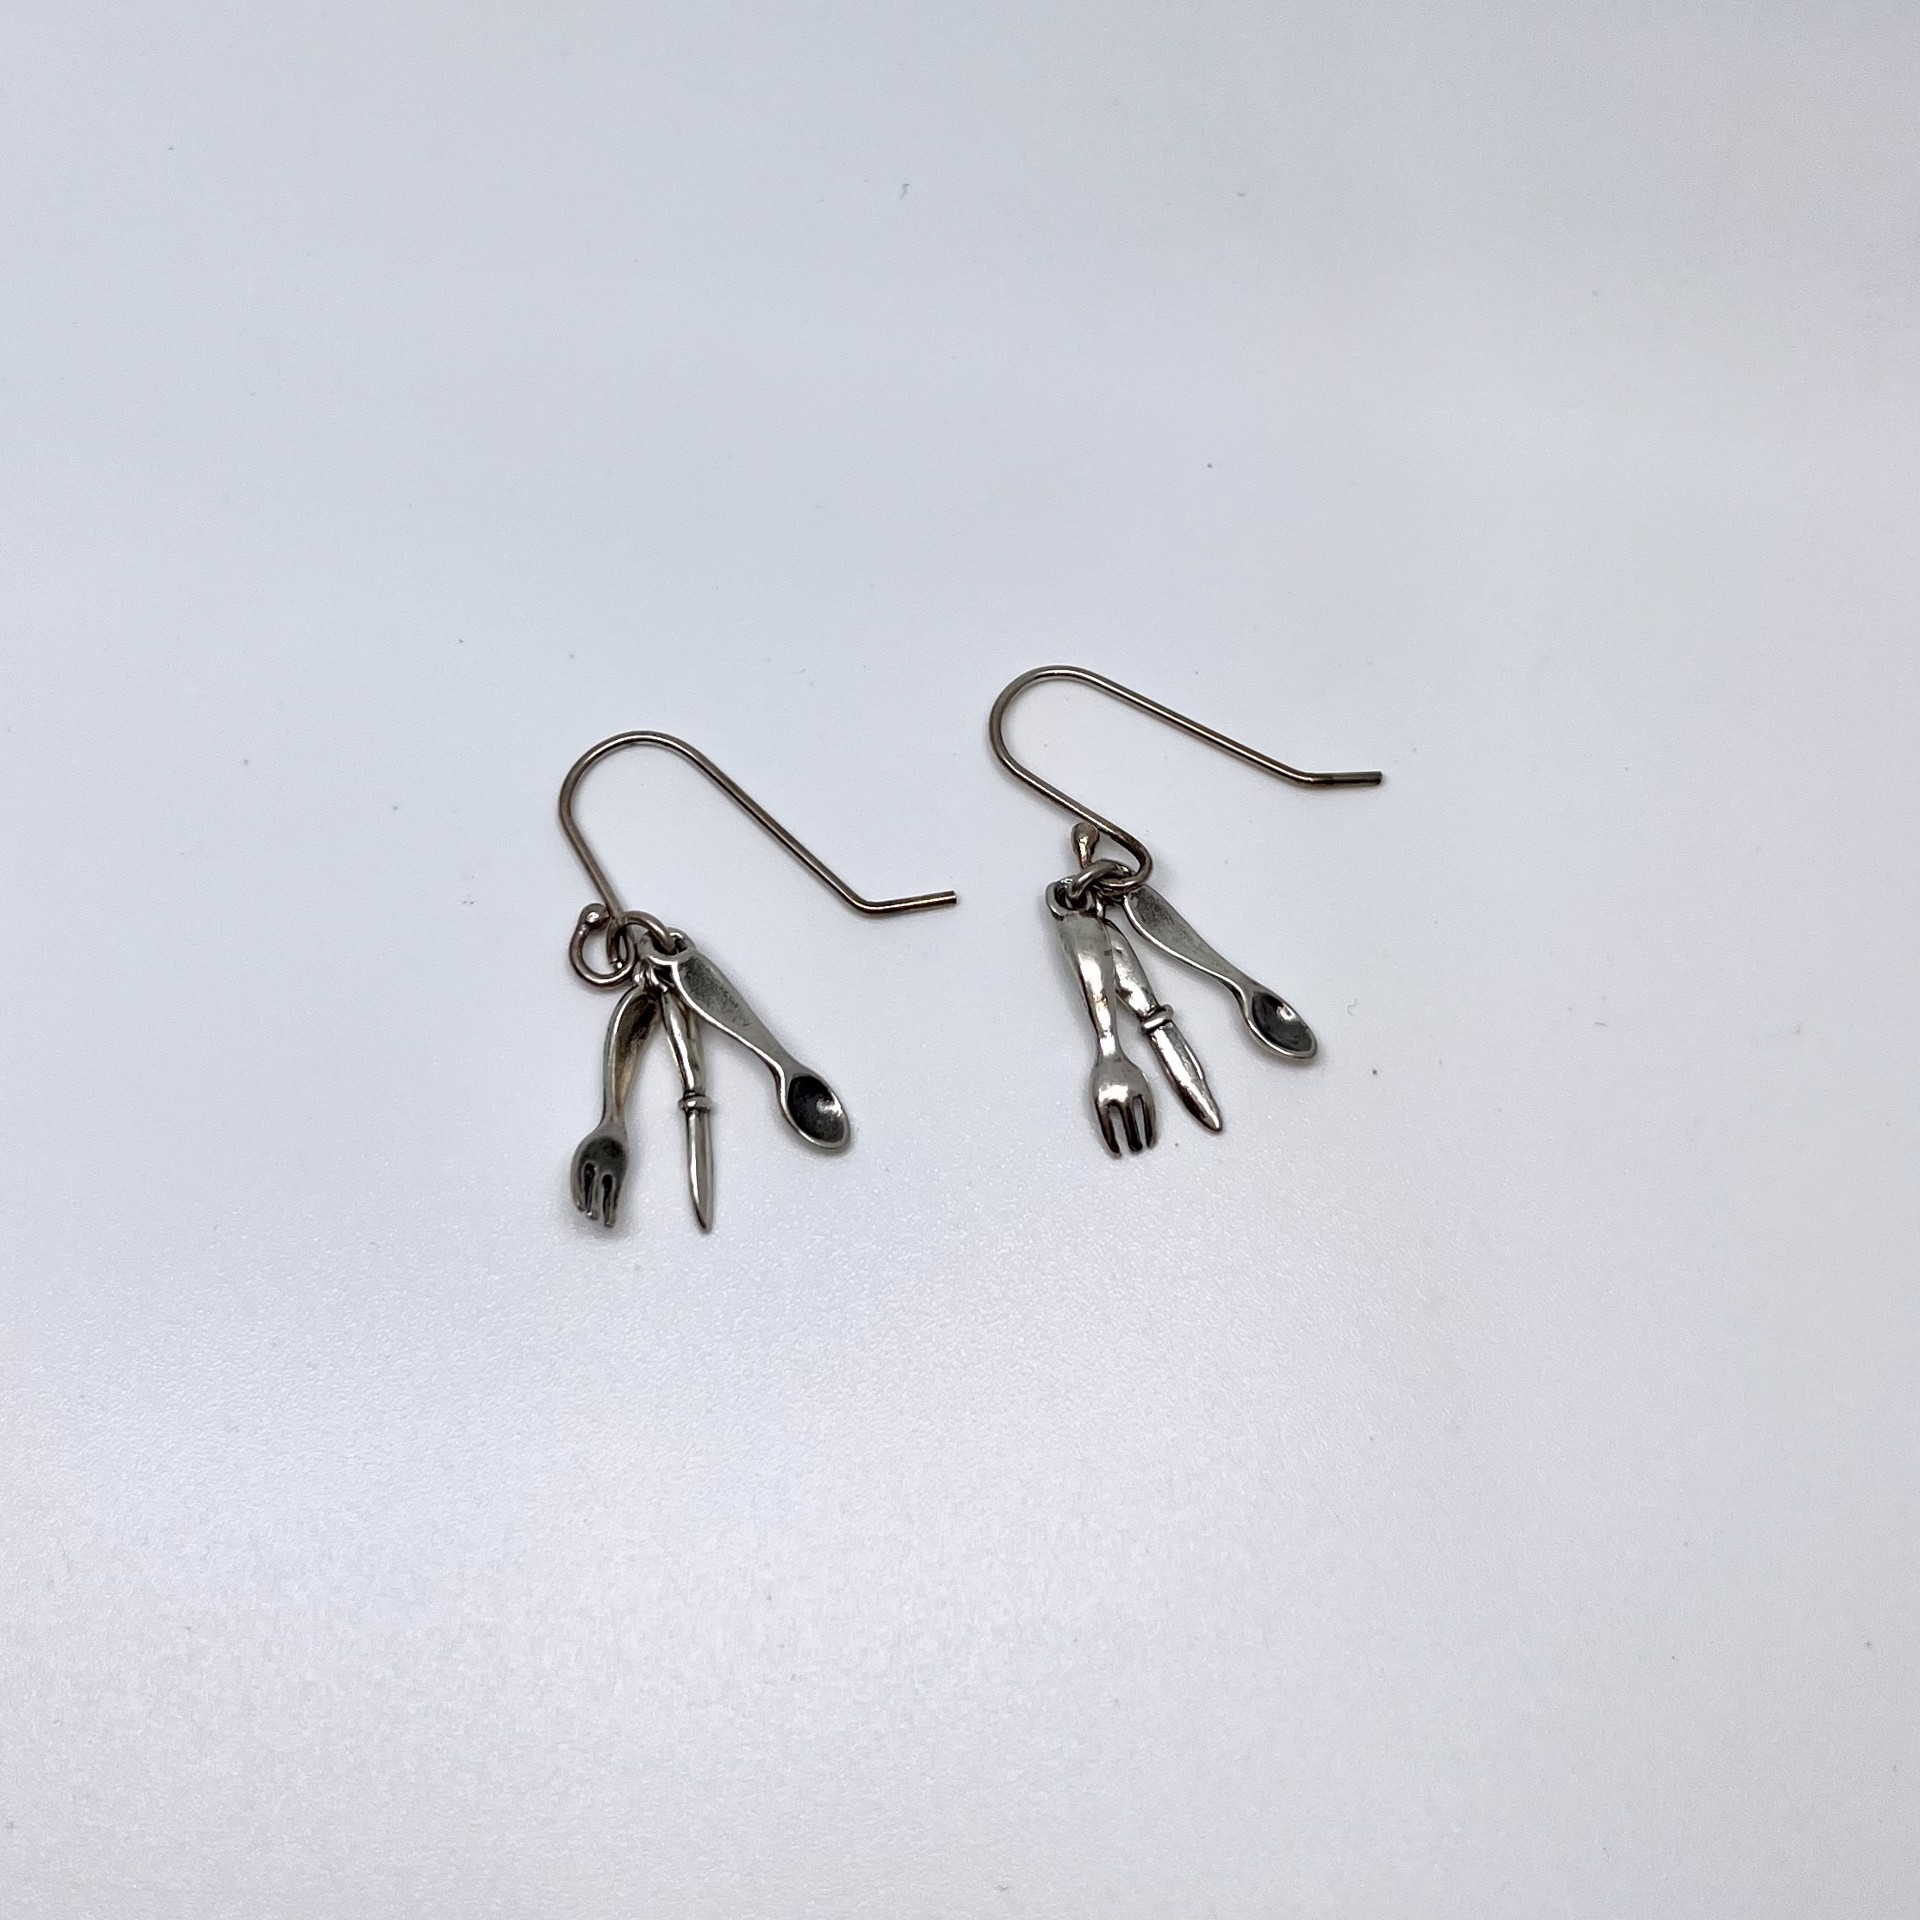 3569 Spoon, Knife, and Fork Earrings by Gina Caruso